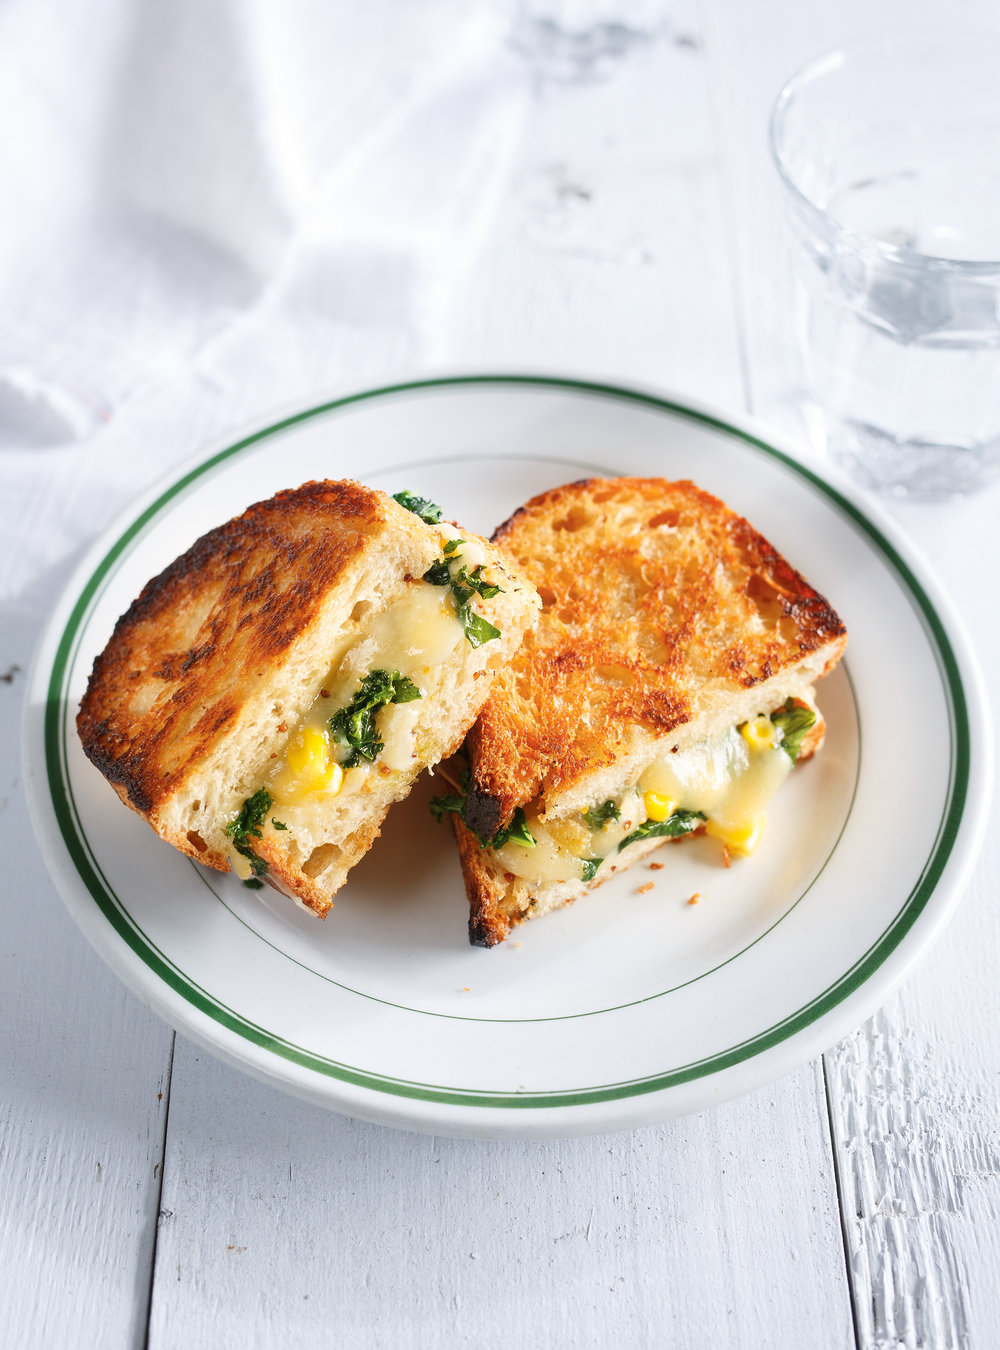 Grilled cheese au kale